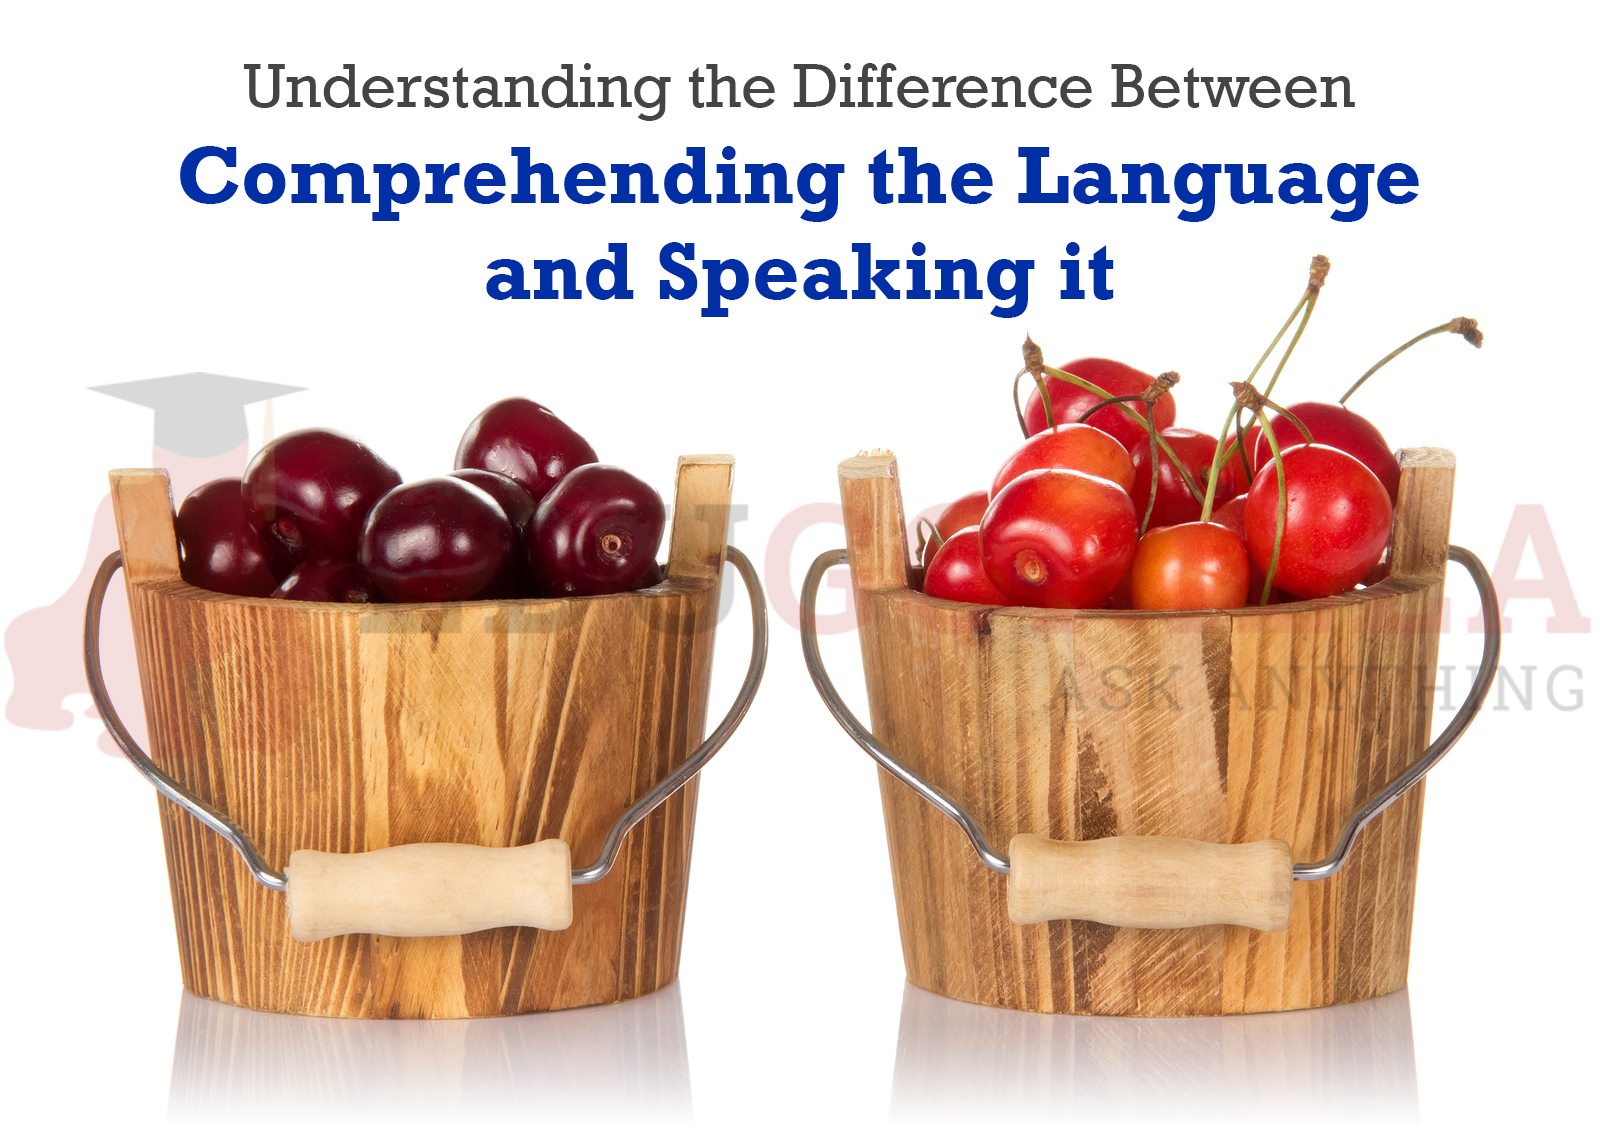 understanding the Difference Between Comprehending the Language and Speaking it